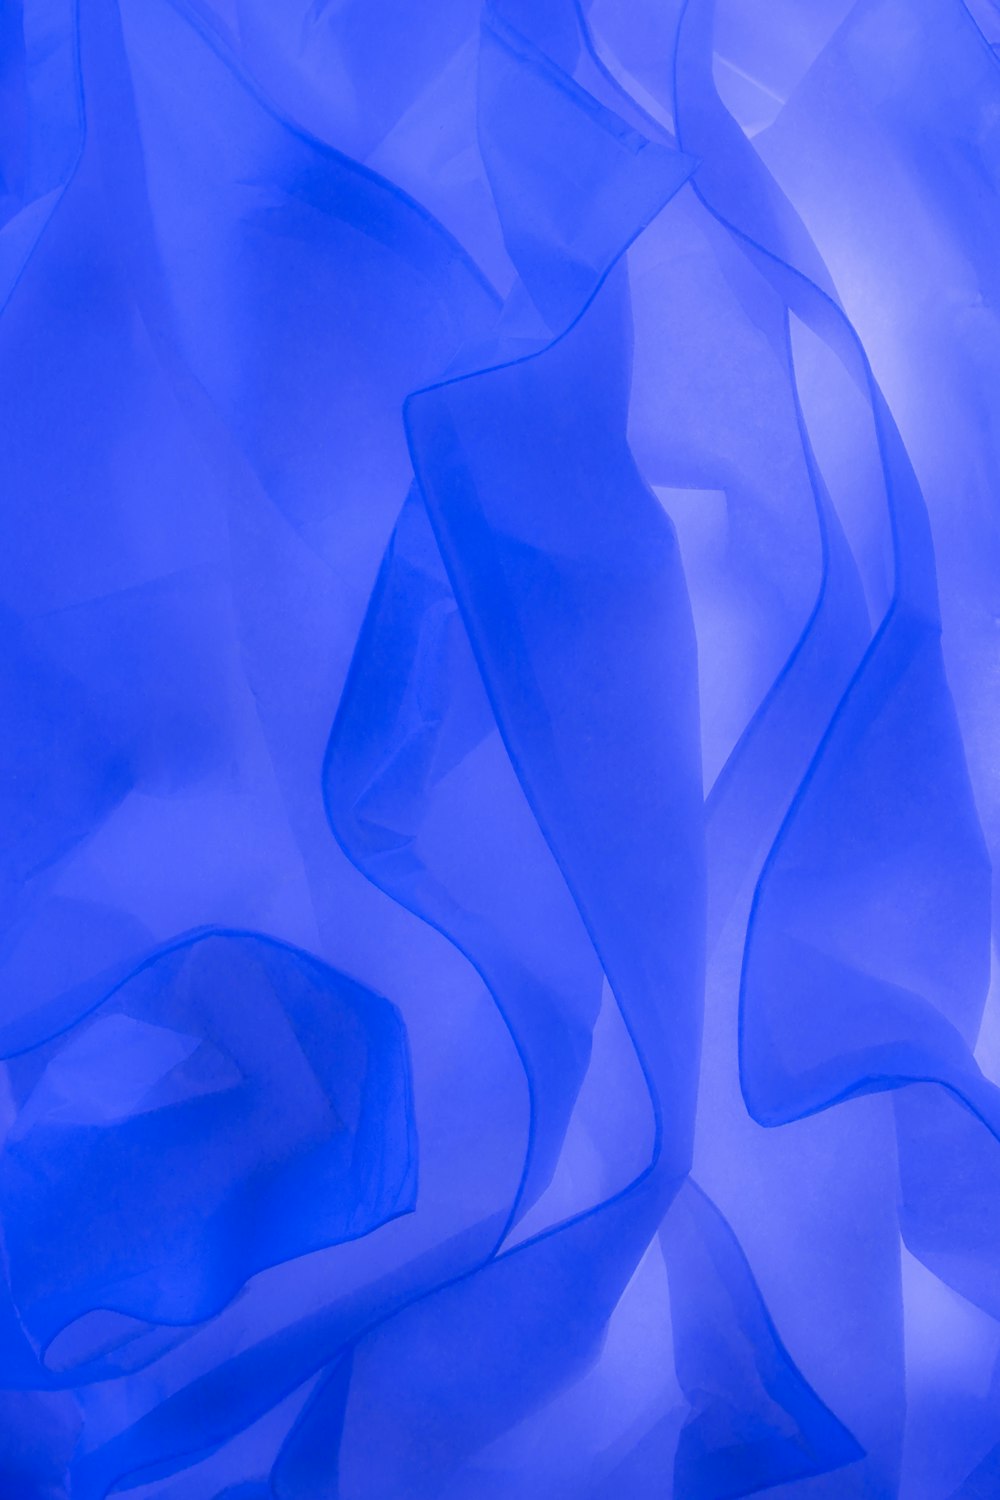 a close up of a blue sheer fabric